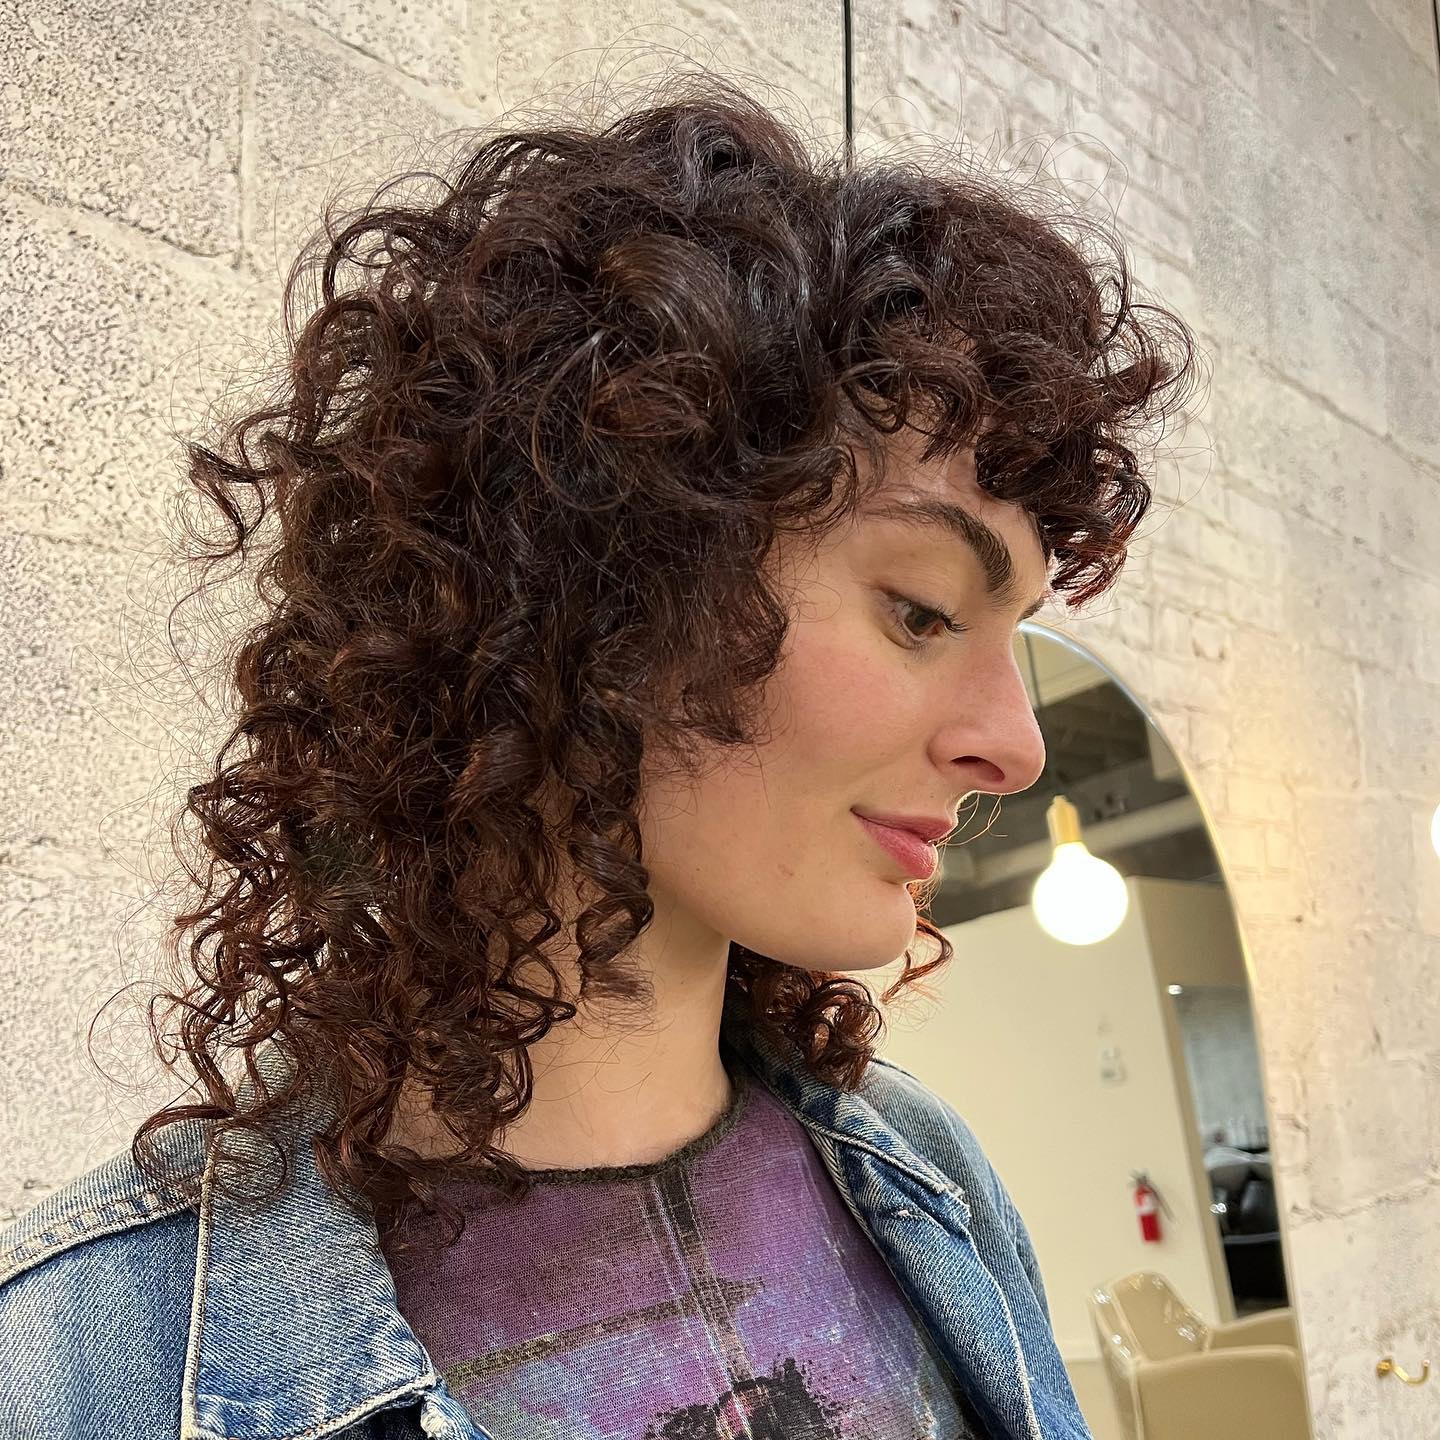 Curly Shag Hairstyle 116 Curly hair shaggy bob | Curly shag mullet | Medium length curly shags Curly Shag Hairstyles for Women